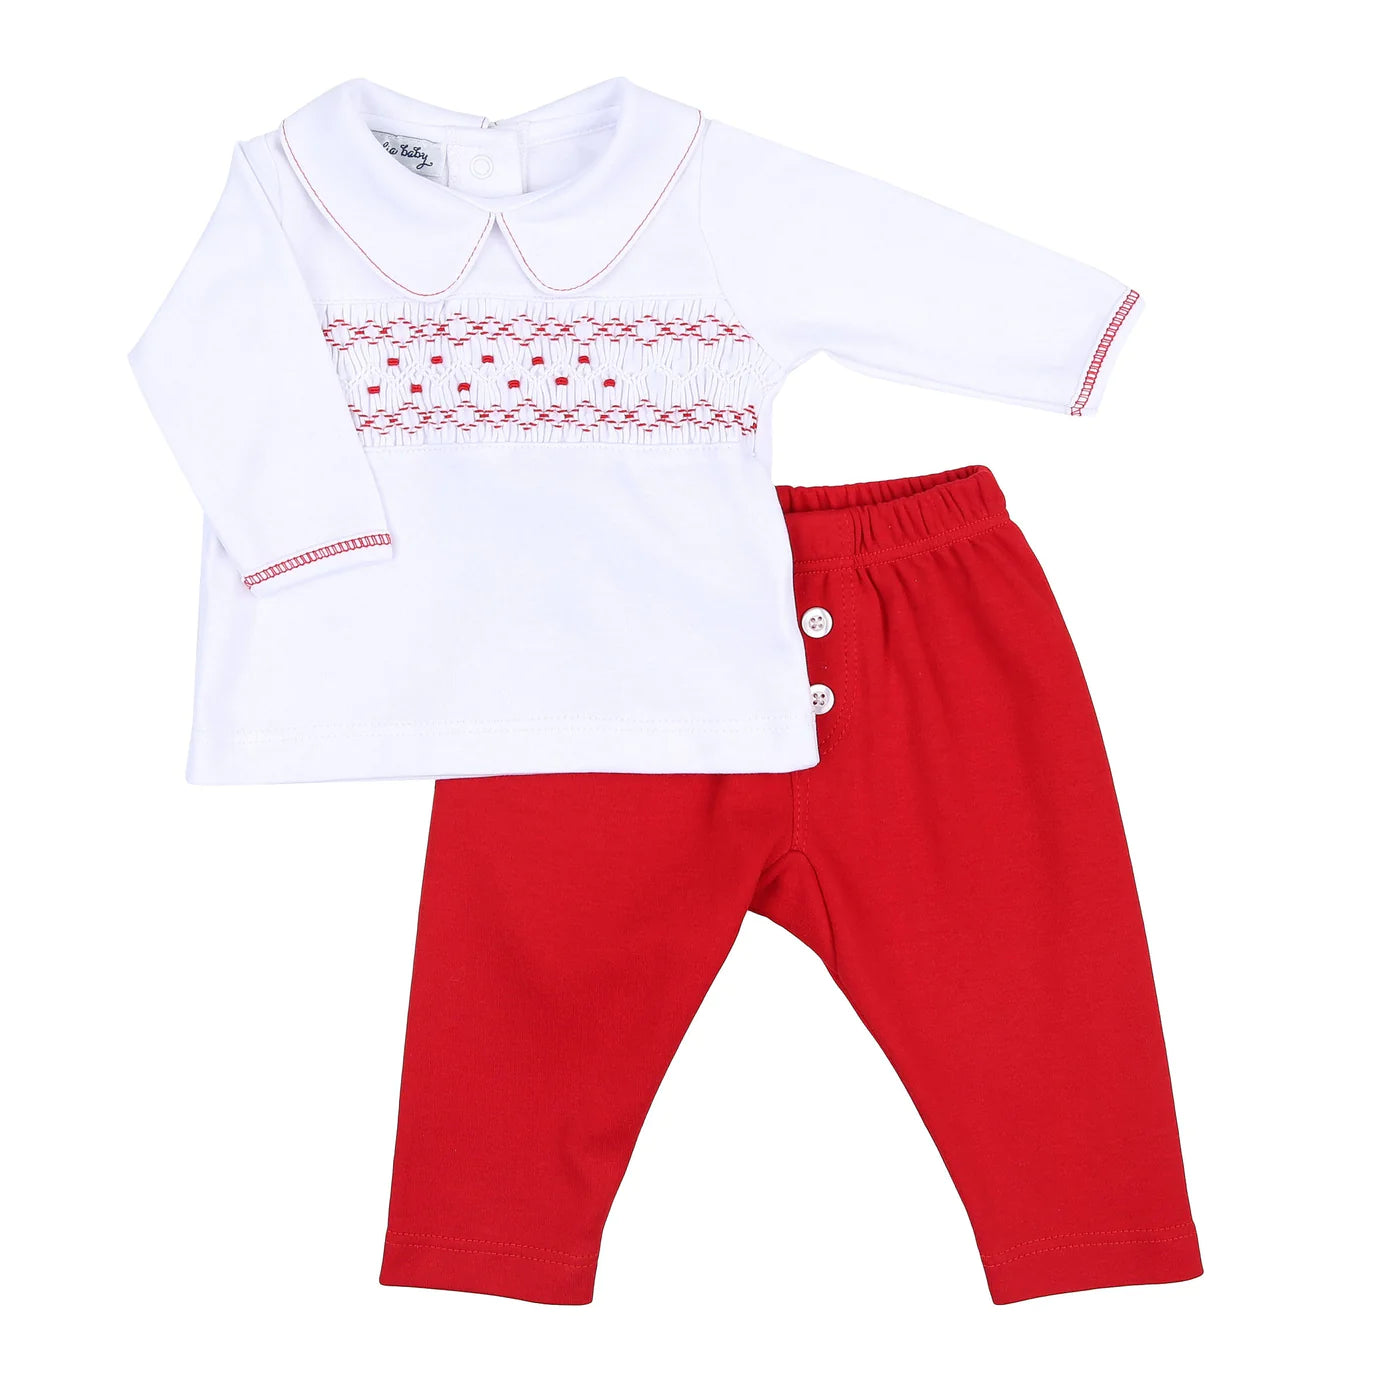 Cora and Cooper smock collared 2pc set (boy)